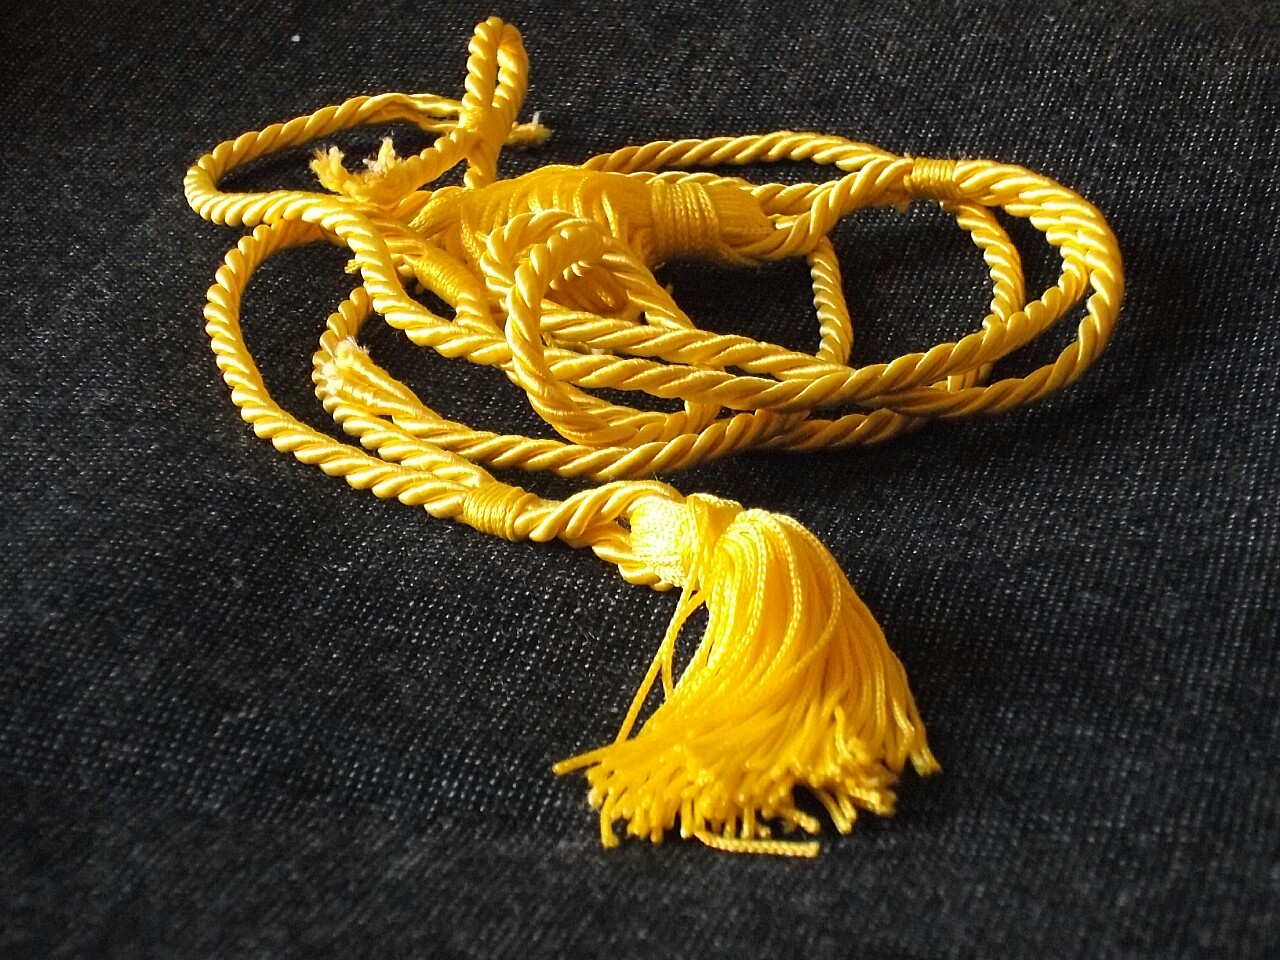 The yellow cord...